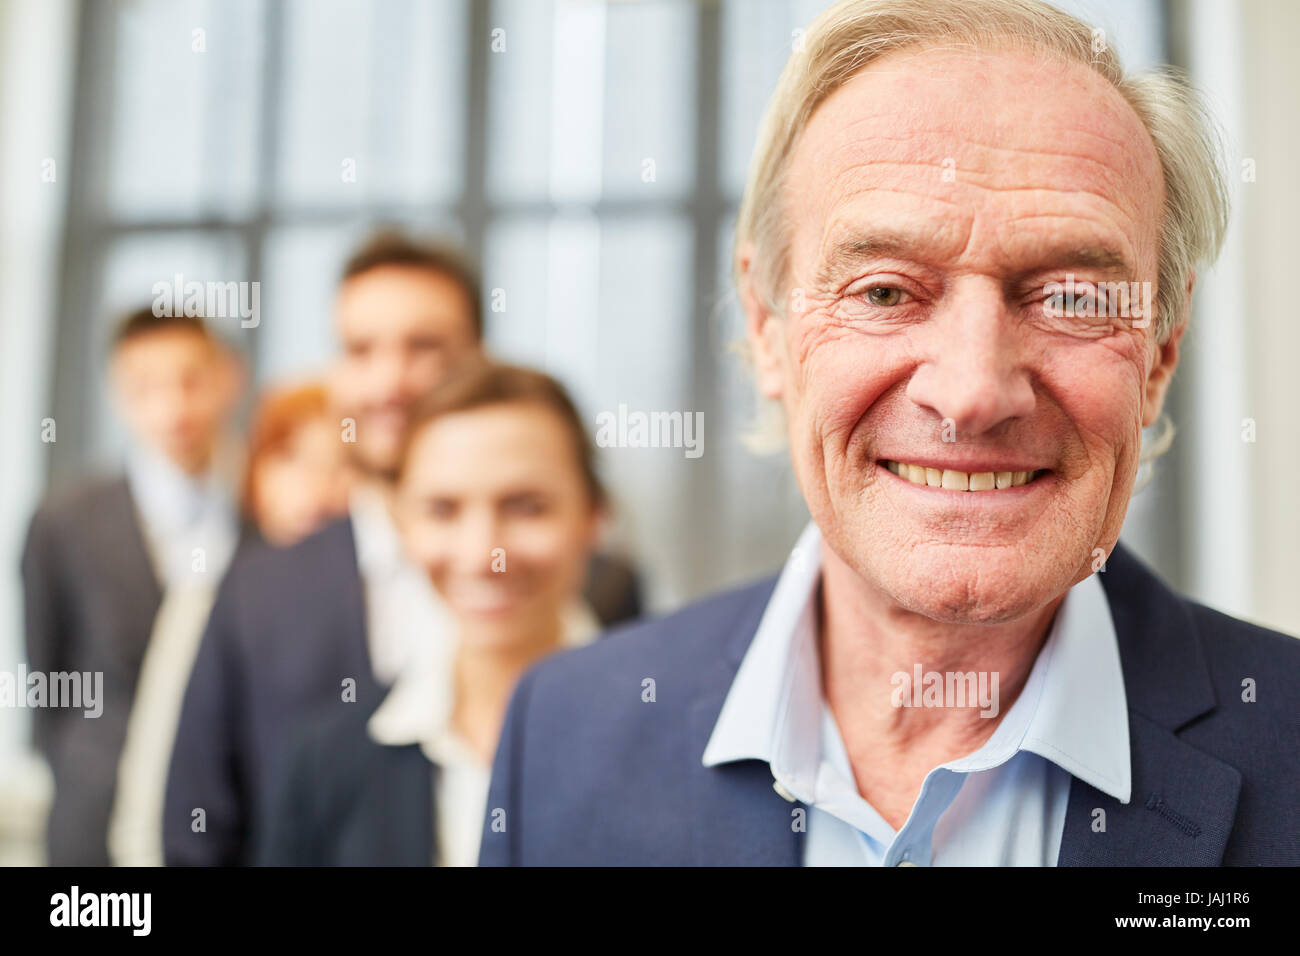 Senior man as the boss or chief executive smiling with his team Stock Photo